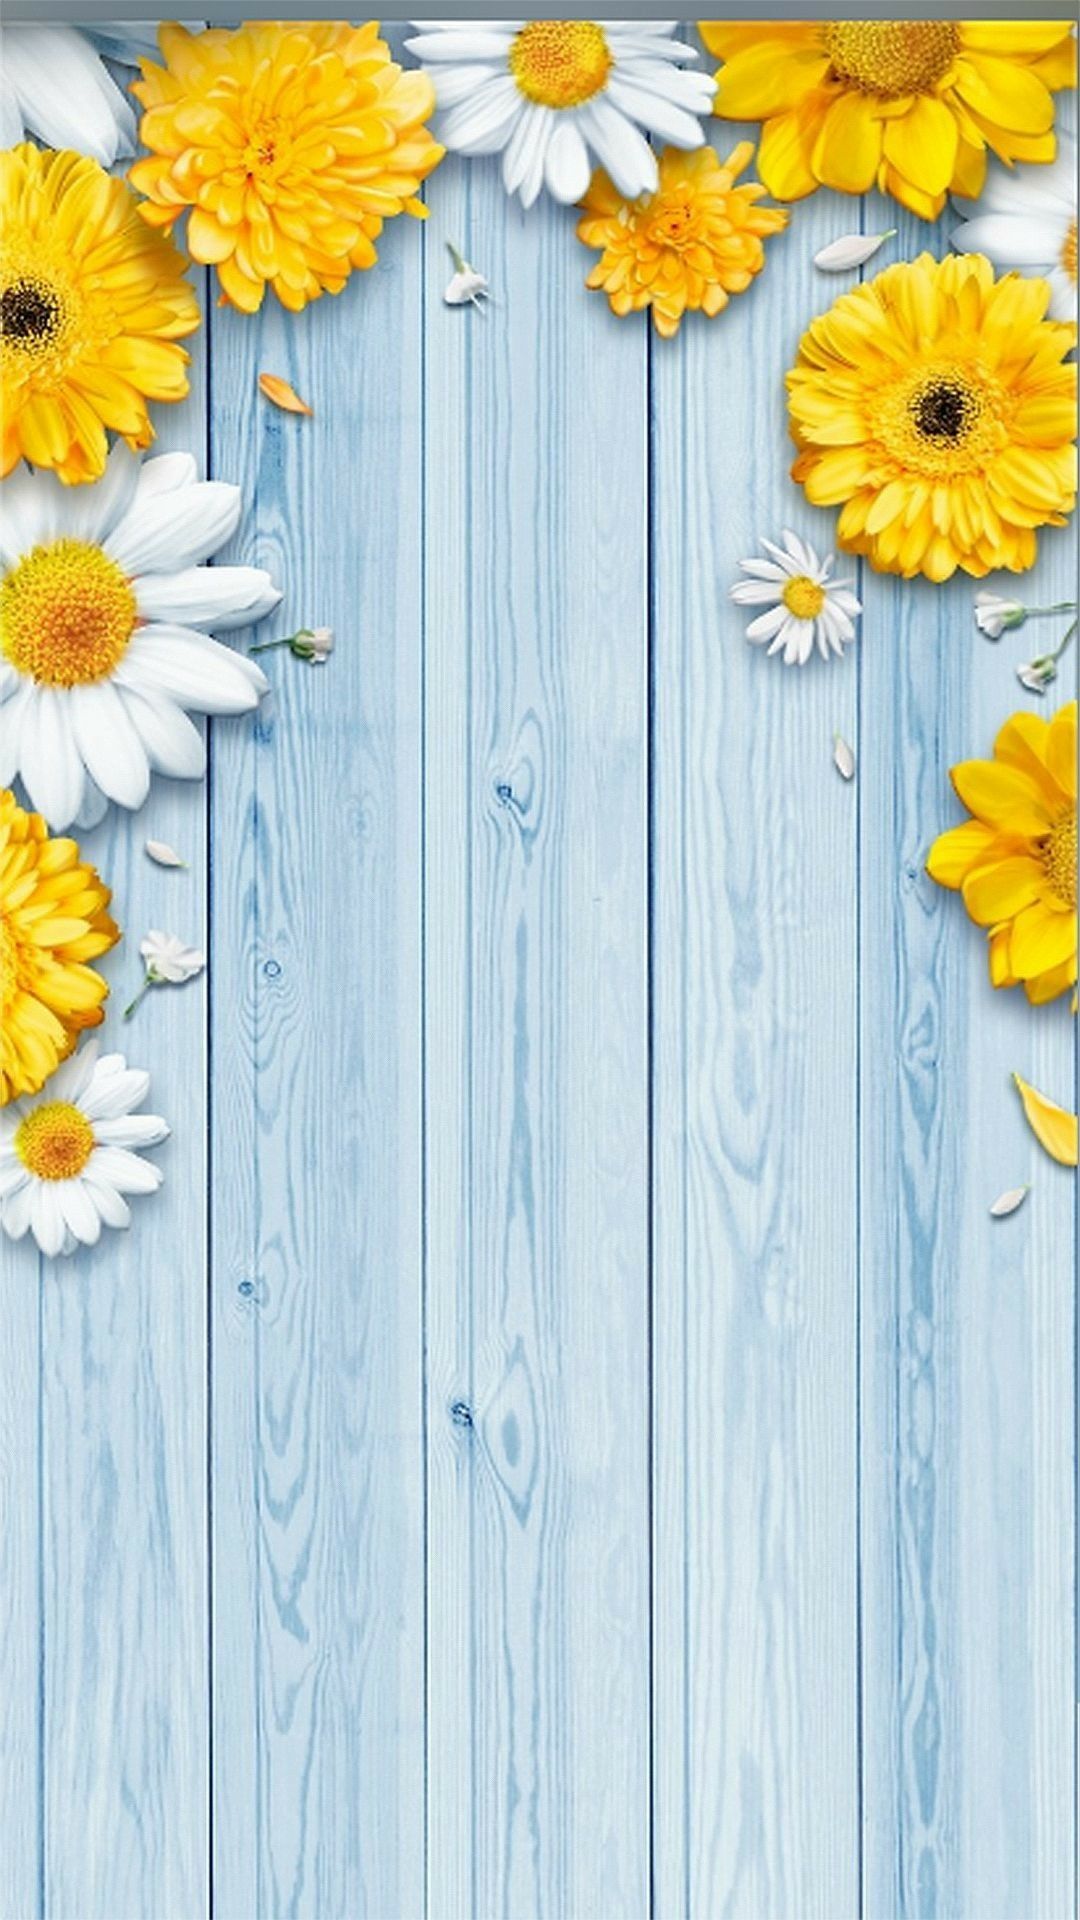 Yellow flowers on a blue wooden background - Woods